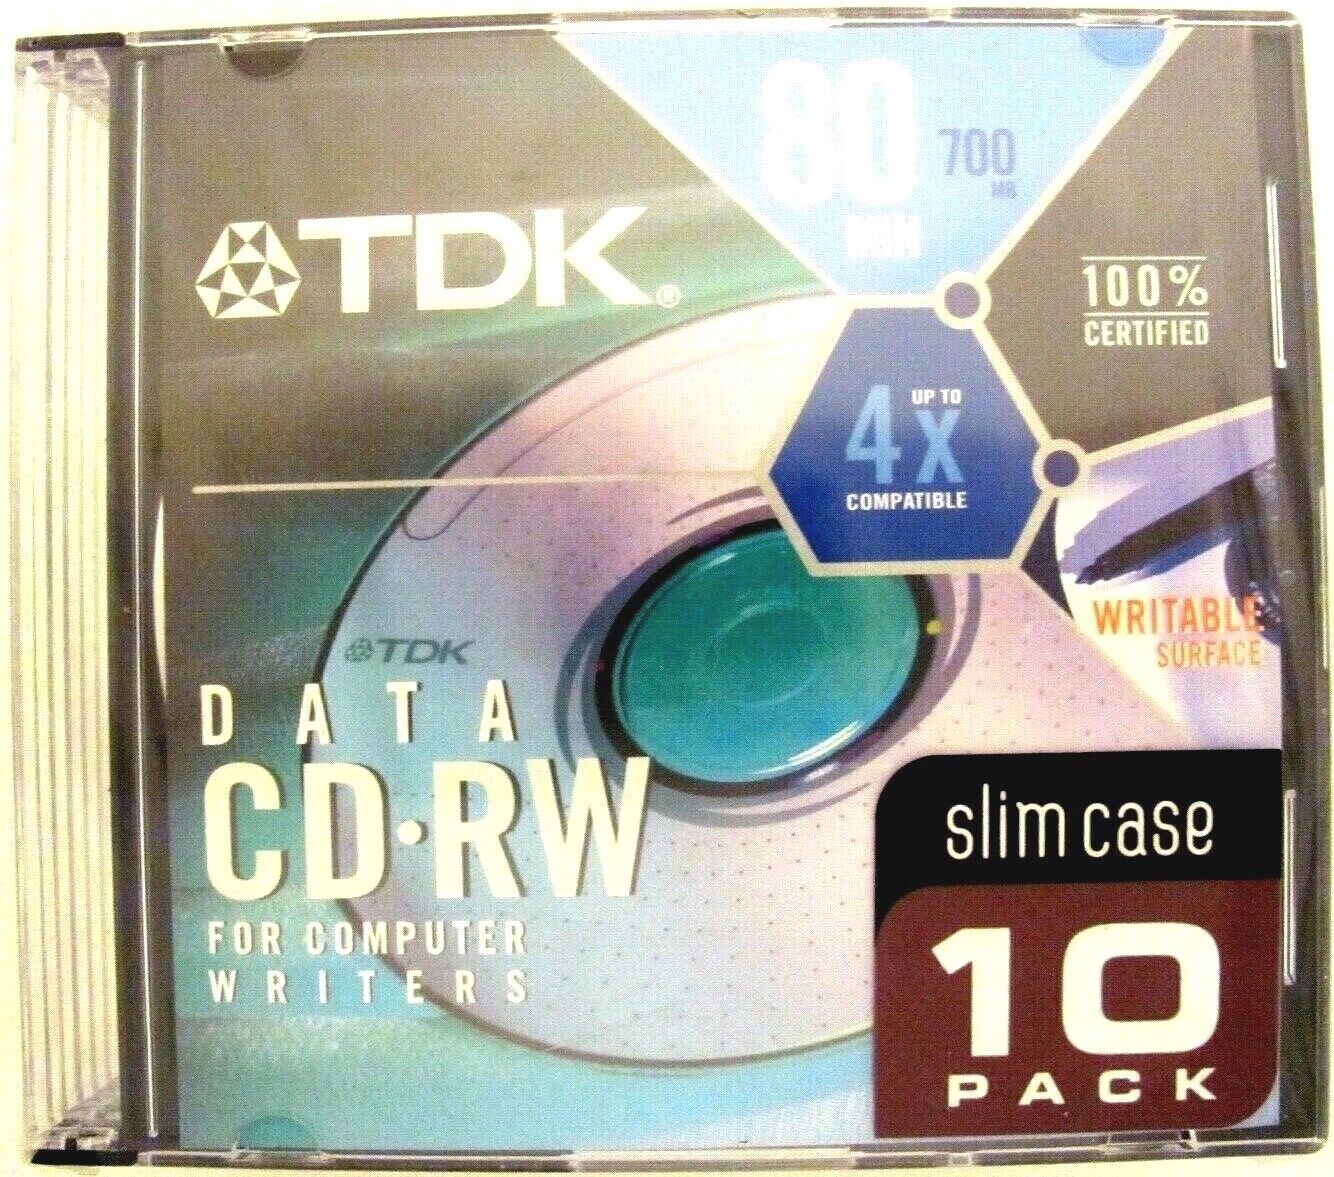 TDK Data CD RW 10 Pack Media 80 Min 700 MB For Computer Writers 4X Compatible  